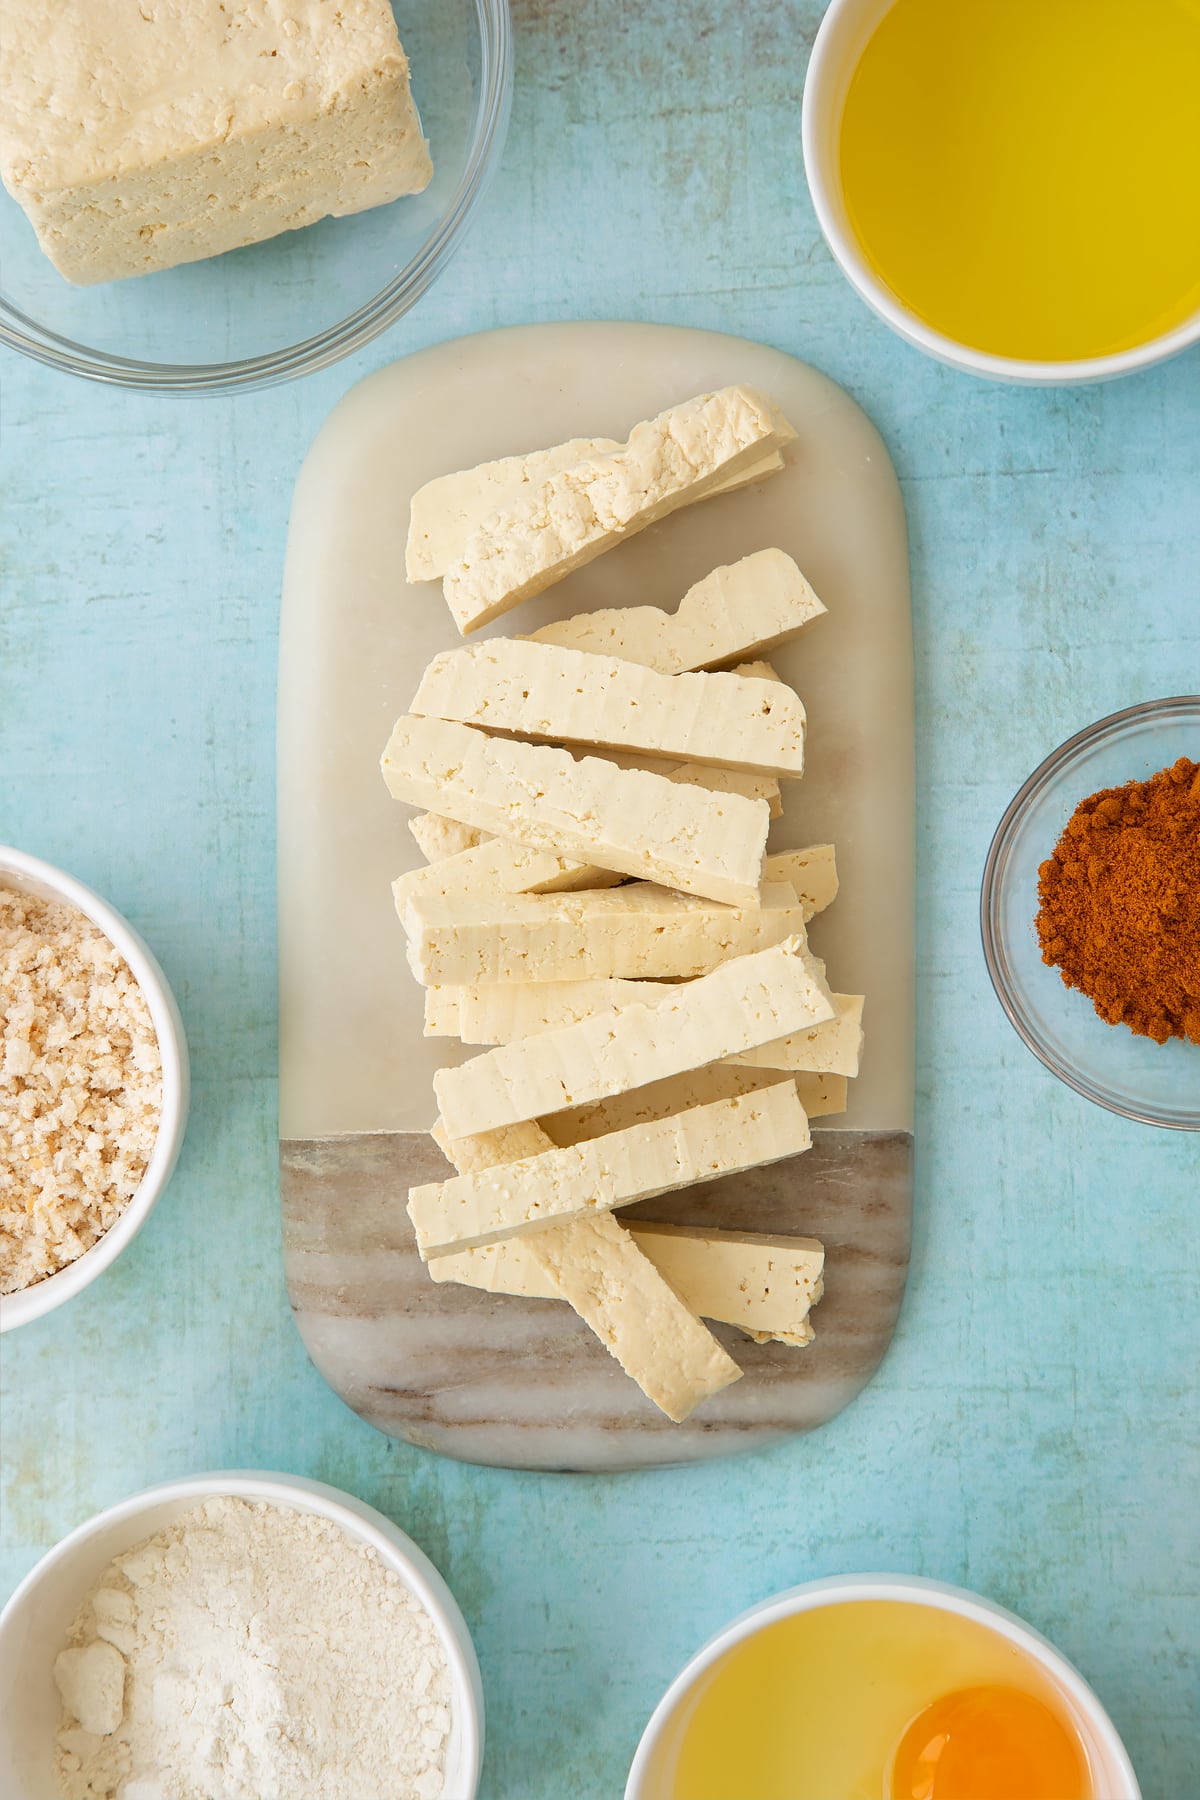 A block of firm tofu cut into fingers on a small marble board. Ingredients to make tofu fingers surround the board.